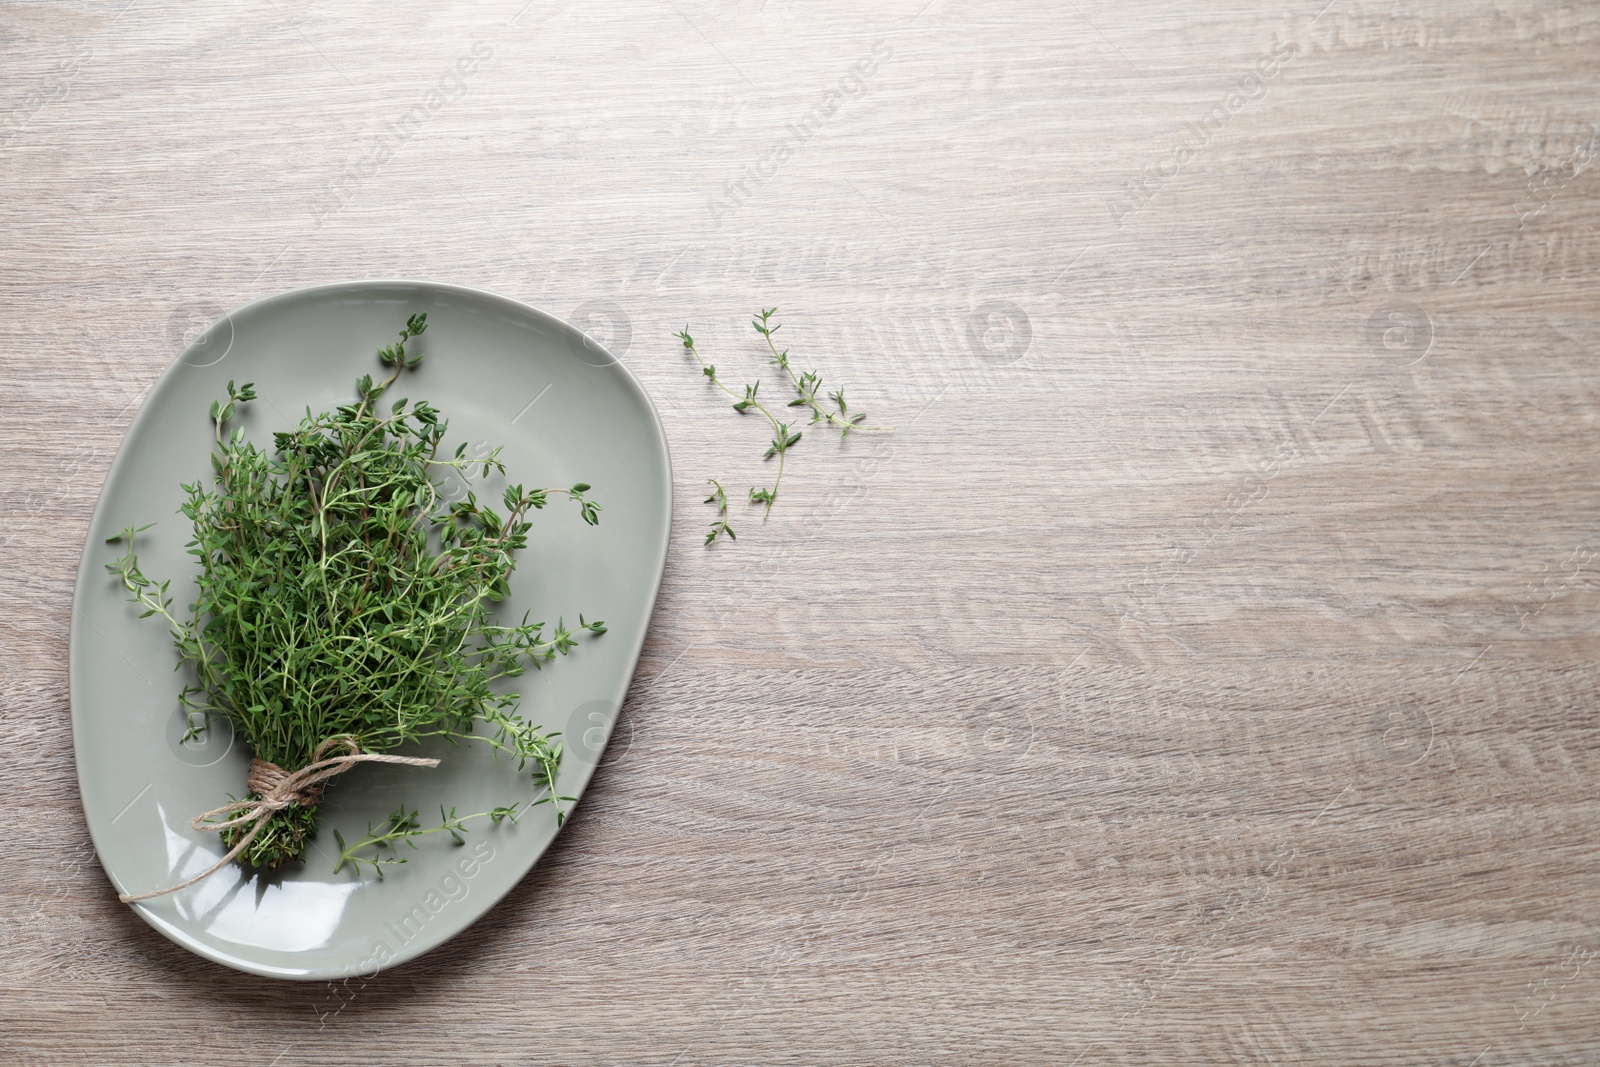 Photo of Bunch of aromatic thyme on wooden table, top view. Space for text